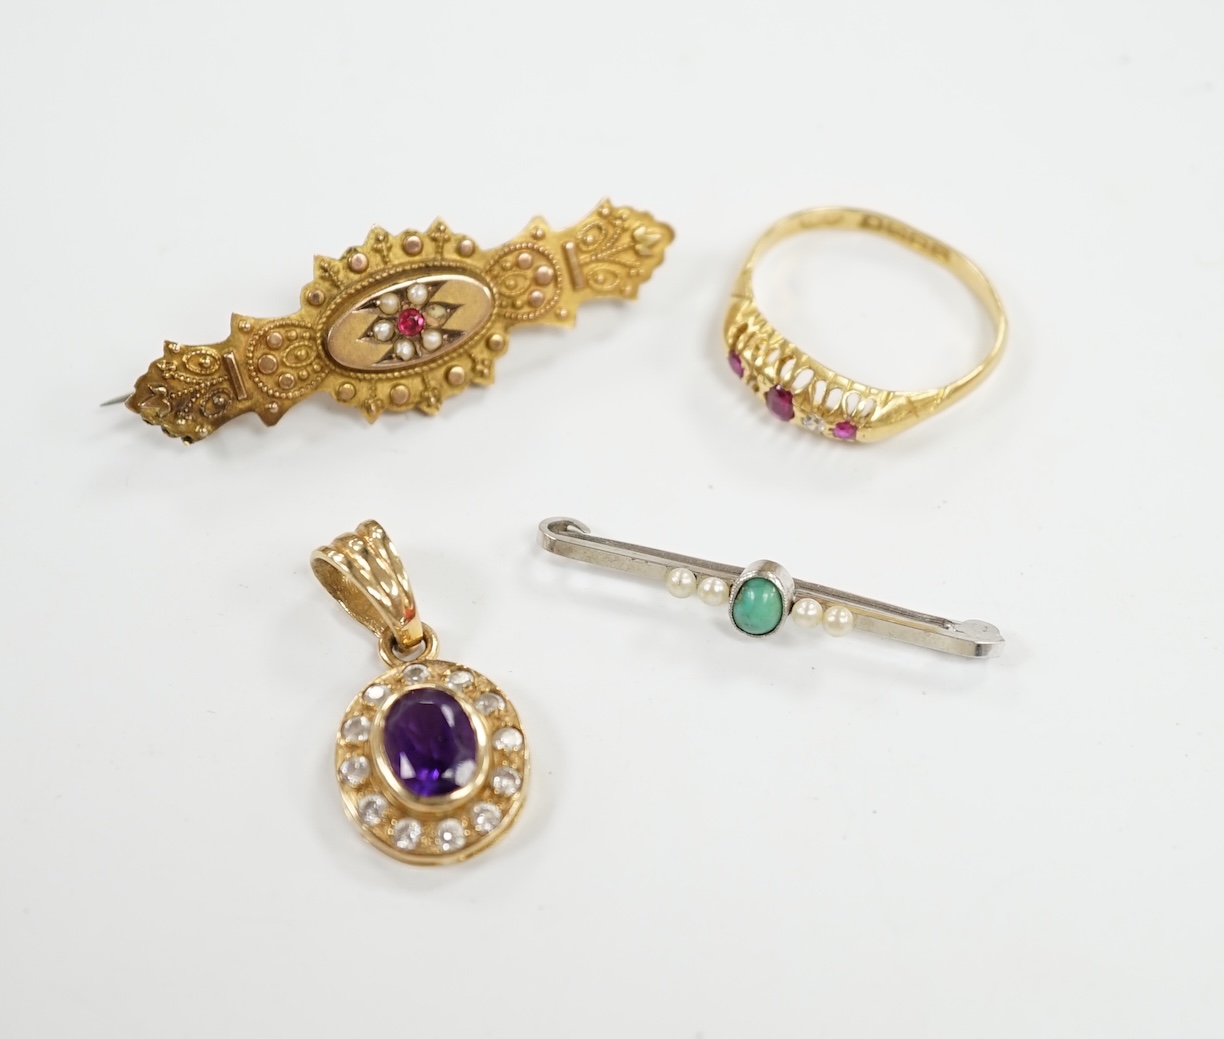 A George V 18ct gold, ruby and diamond set ring (stone missing), together with a 14ct white metal and gem set bar brooch, 32mm, a 9ct and gem set brooch and a modern 9ct gold and gem set pendant. Condition - poor to fair